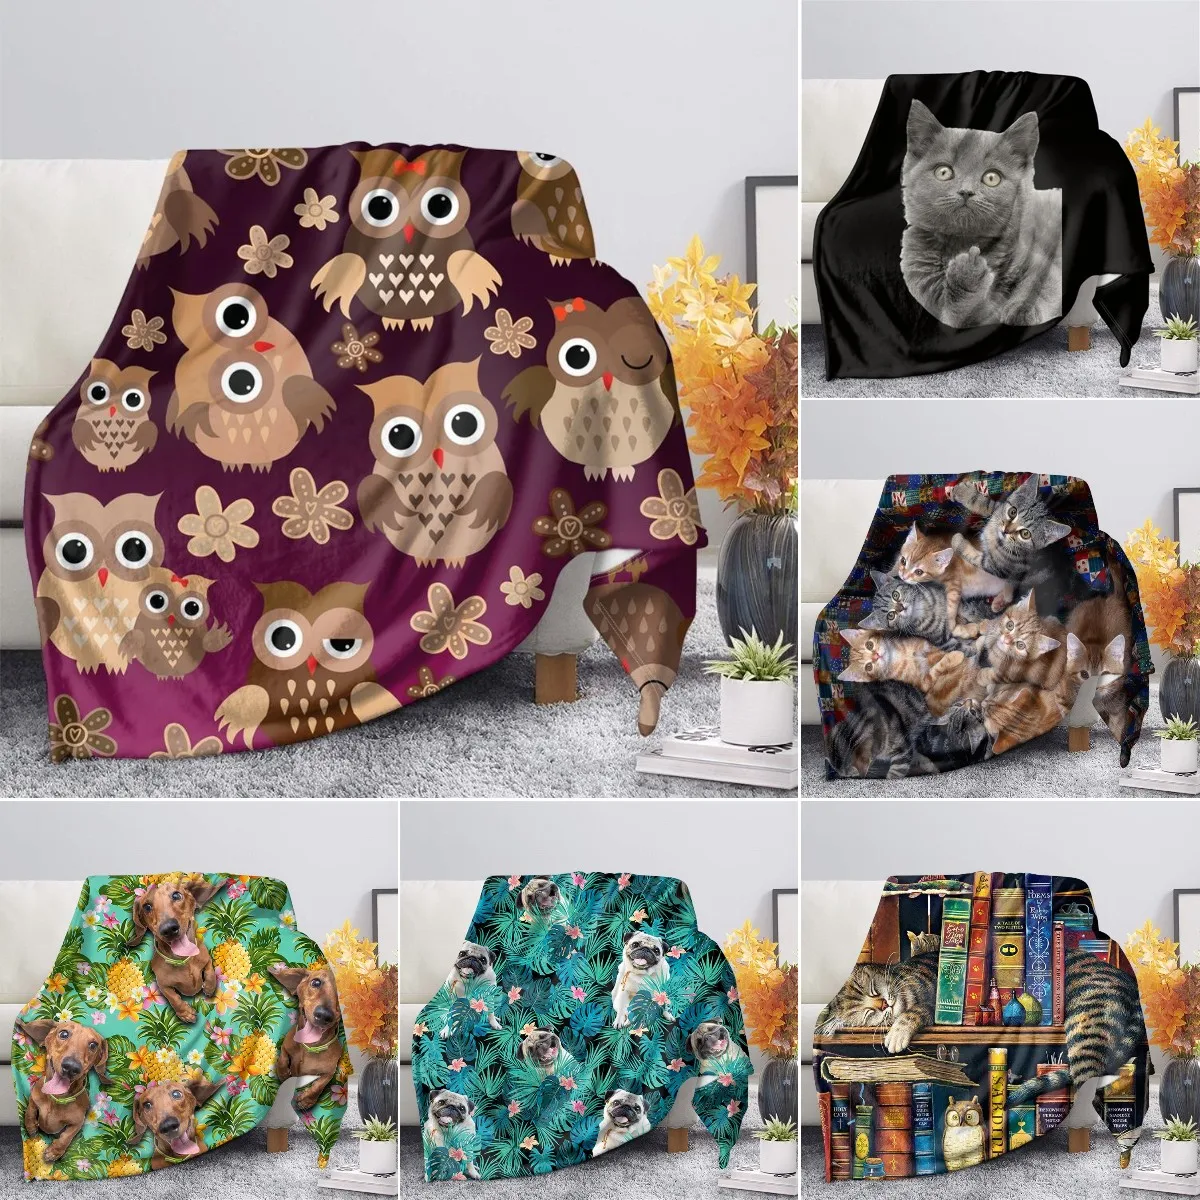 Animals Throw Blanket Owl Cat Dog Flannel Blanket King Queen Size Teenage Boys Girls Gift for Bed Sofa Couch Blanket Super Soft